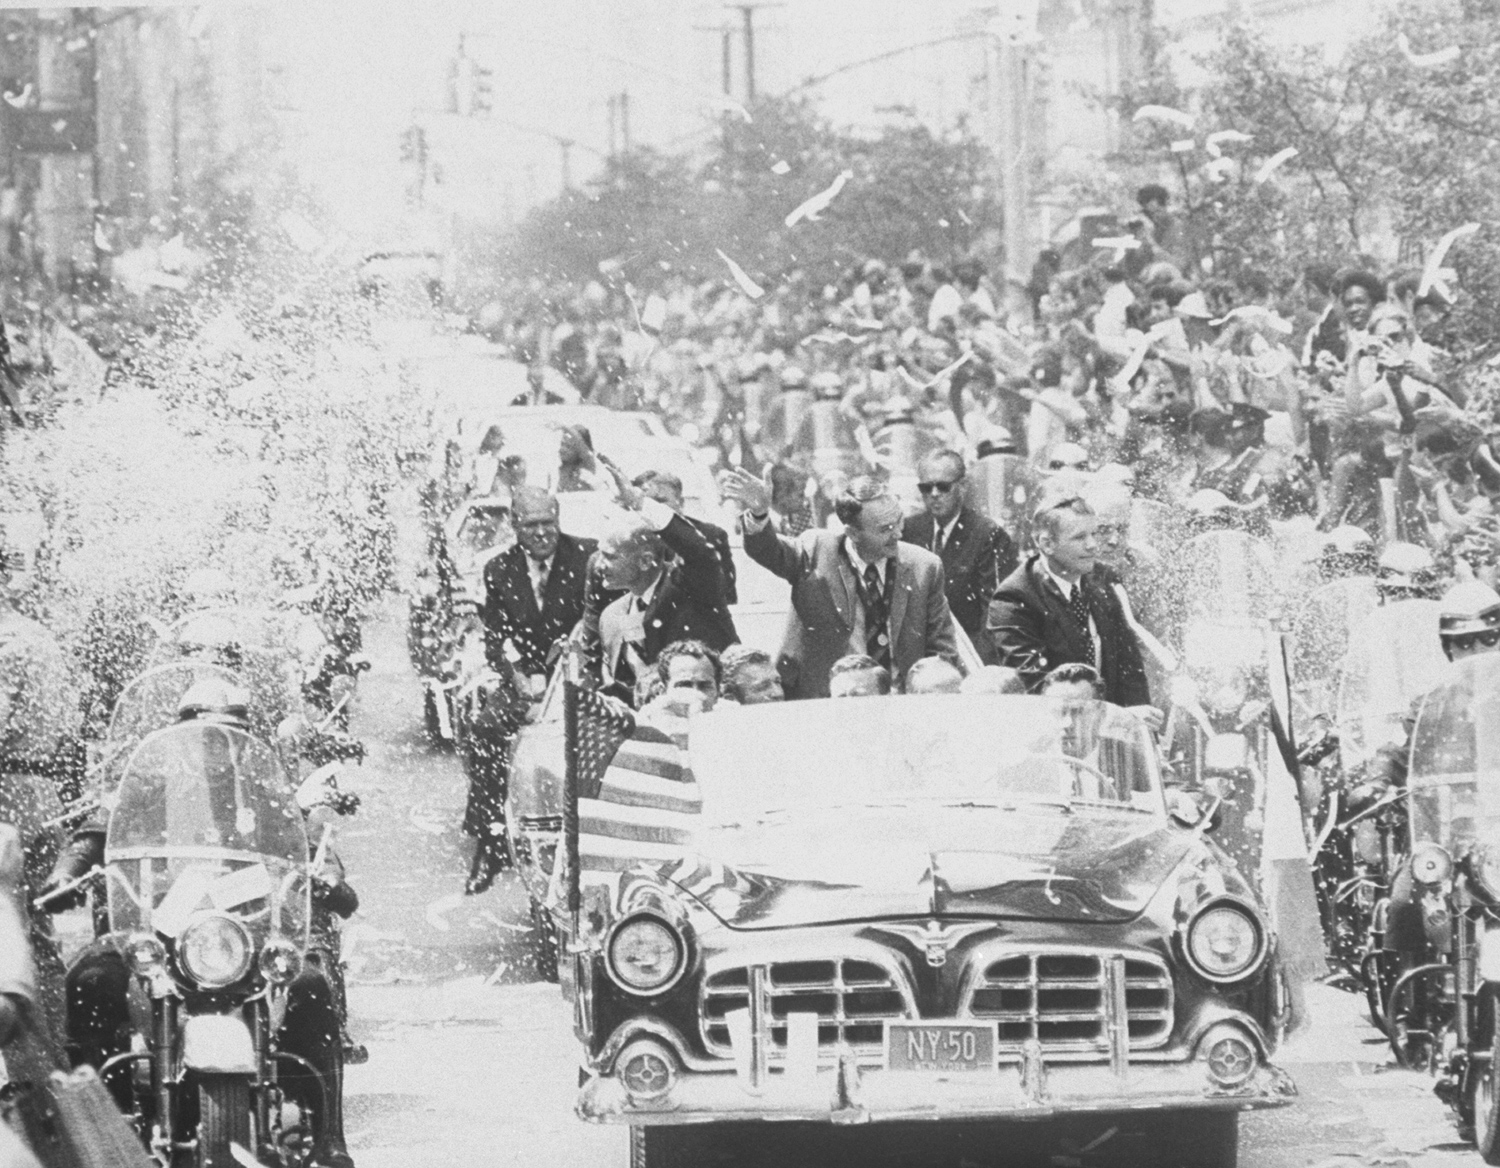 Apollo 11 astronauts Neil Armstrong, Buzz Aldrin and Michael Collins wave to crowds during a parade celebrating their return from the moon, August 1969.